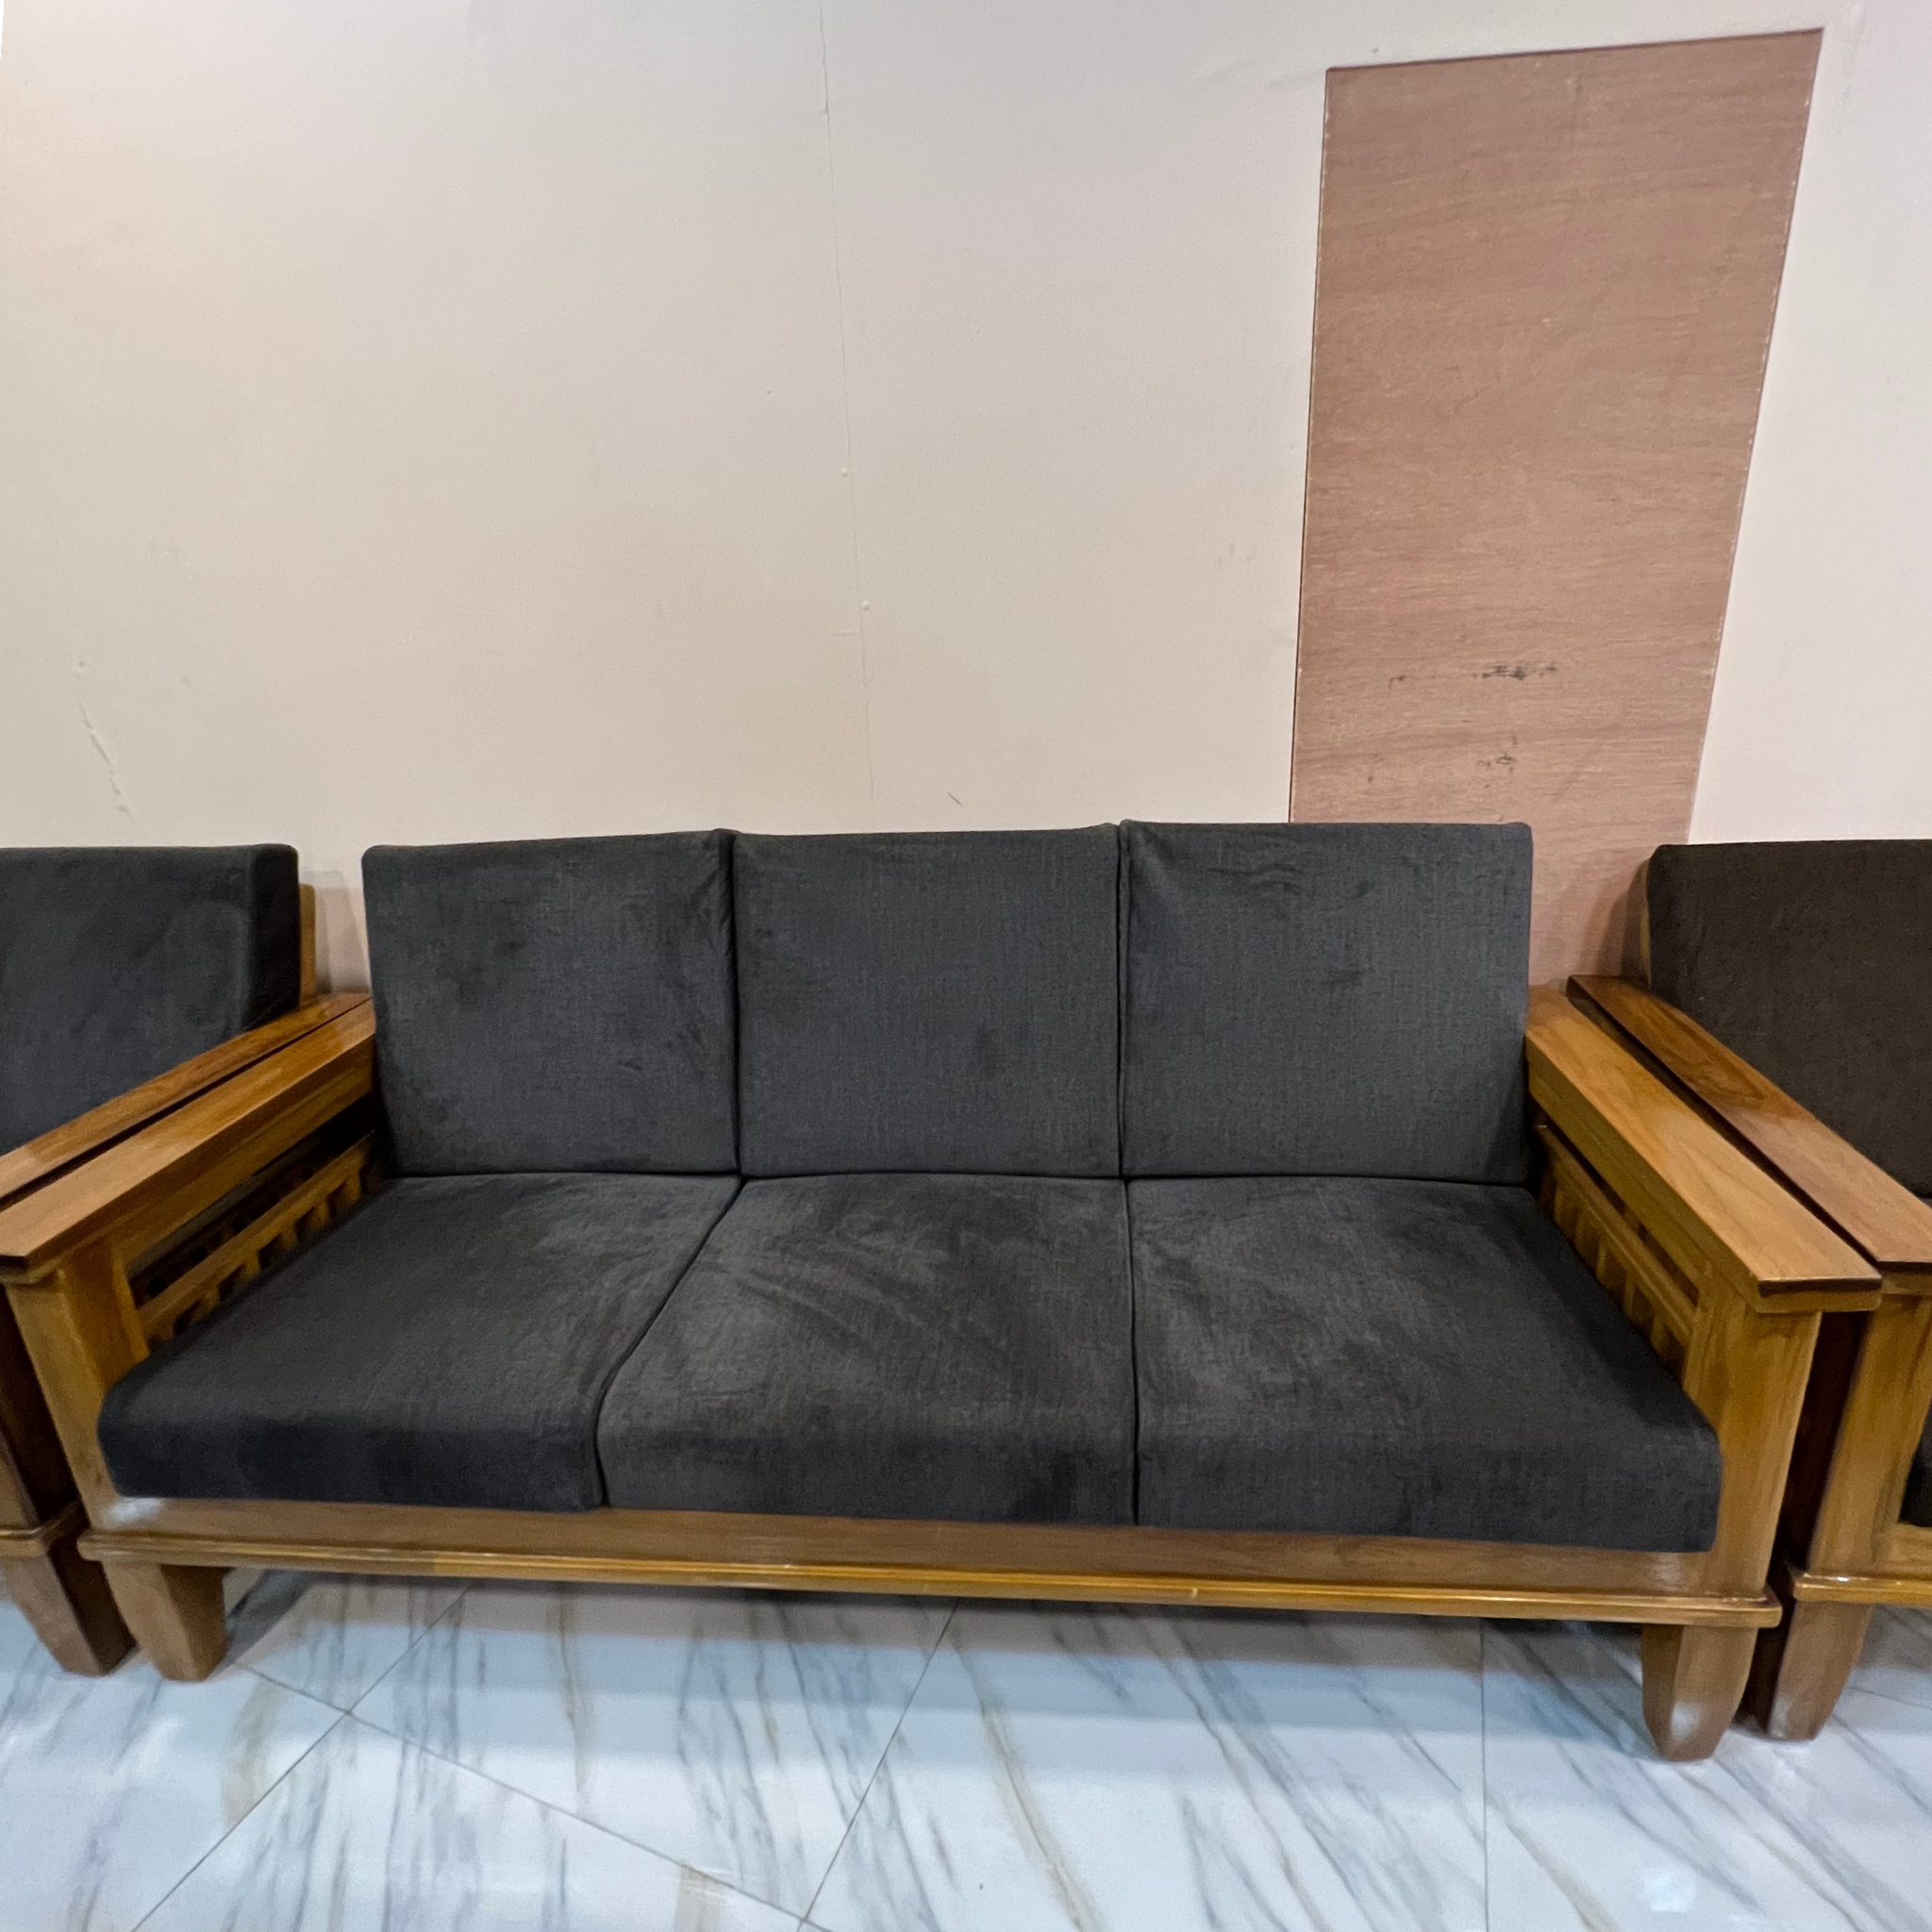 Seven stick Sofa Set - PL-WS10  (With Out Cushion)